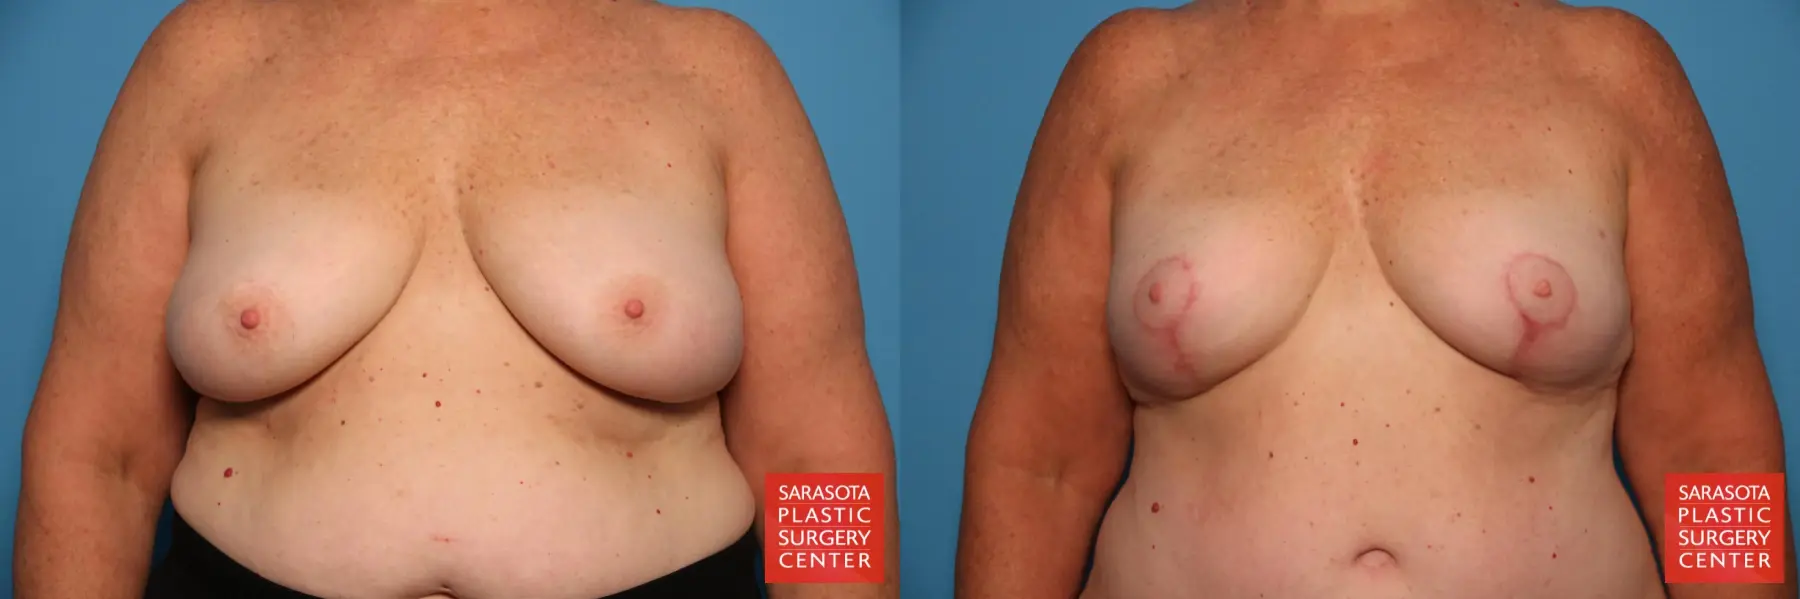 Breast Lift - Fat: Patient 1 - Before and After  